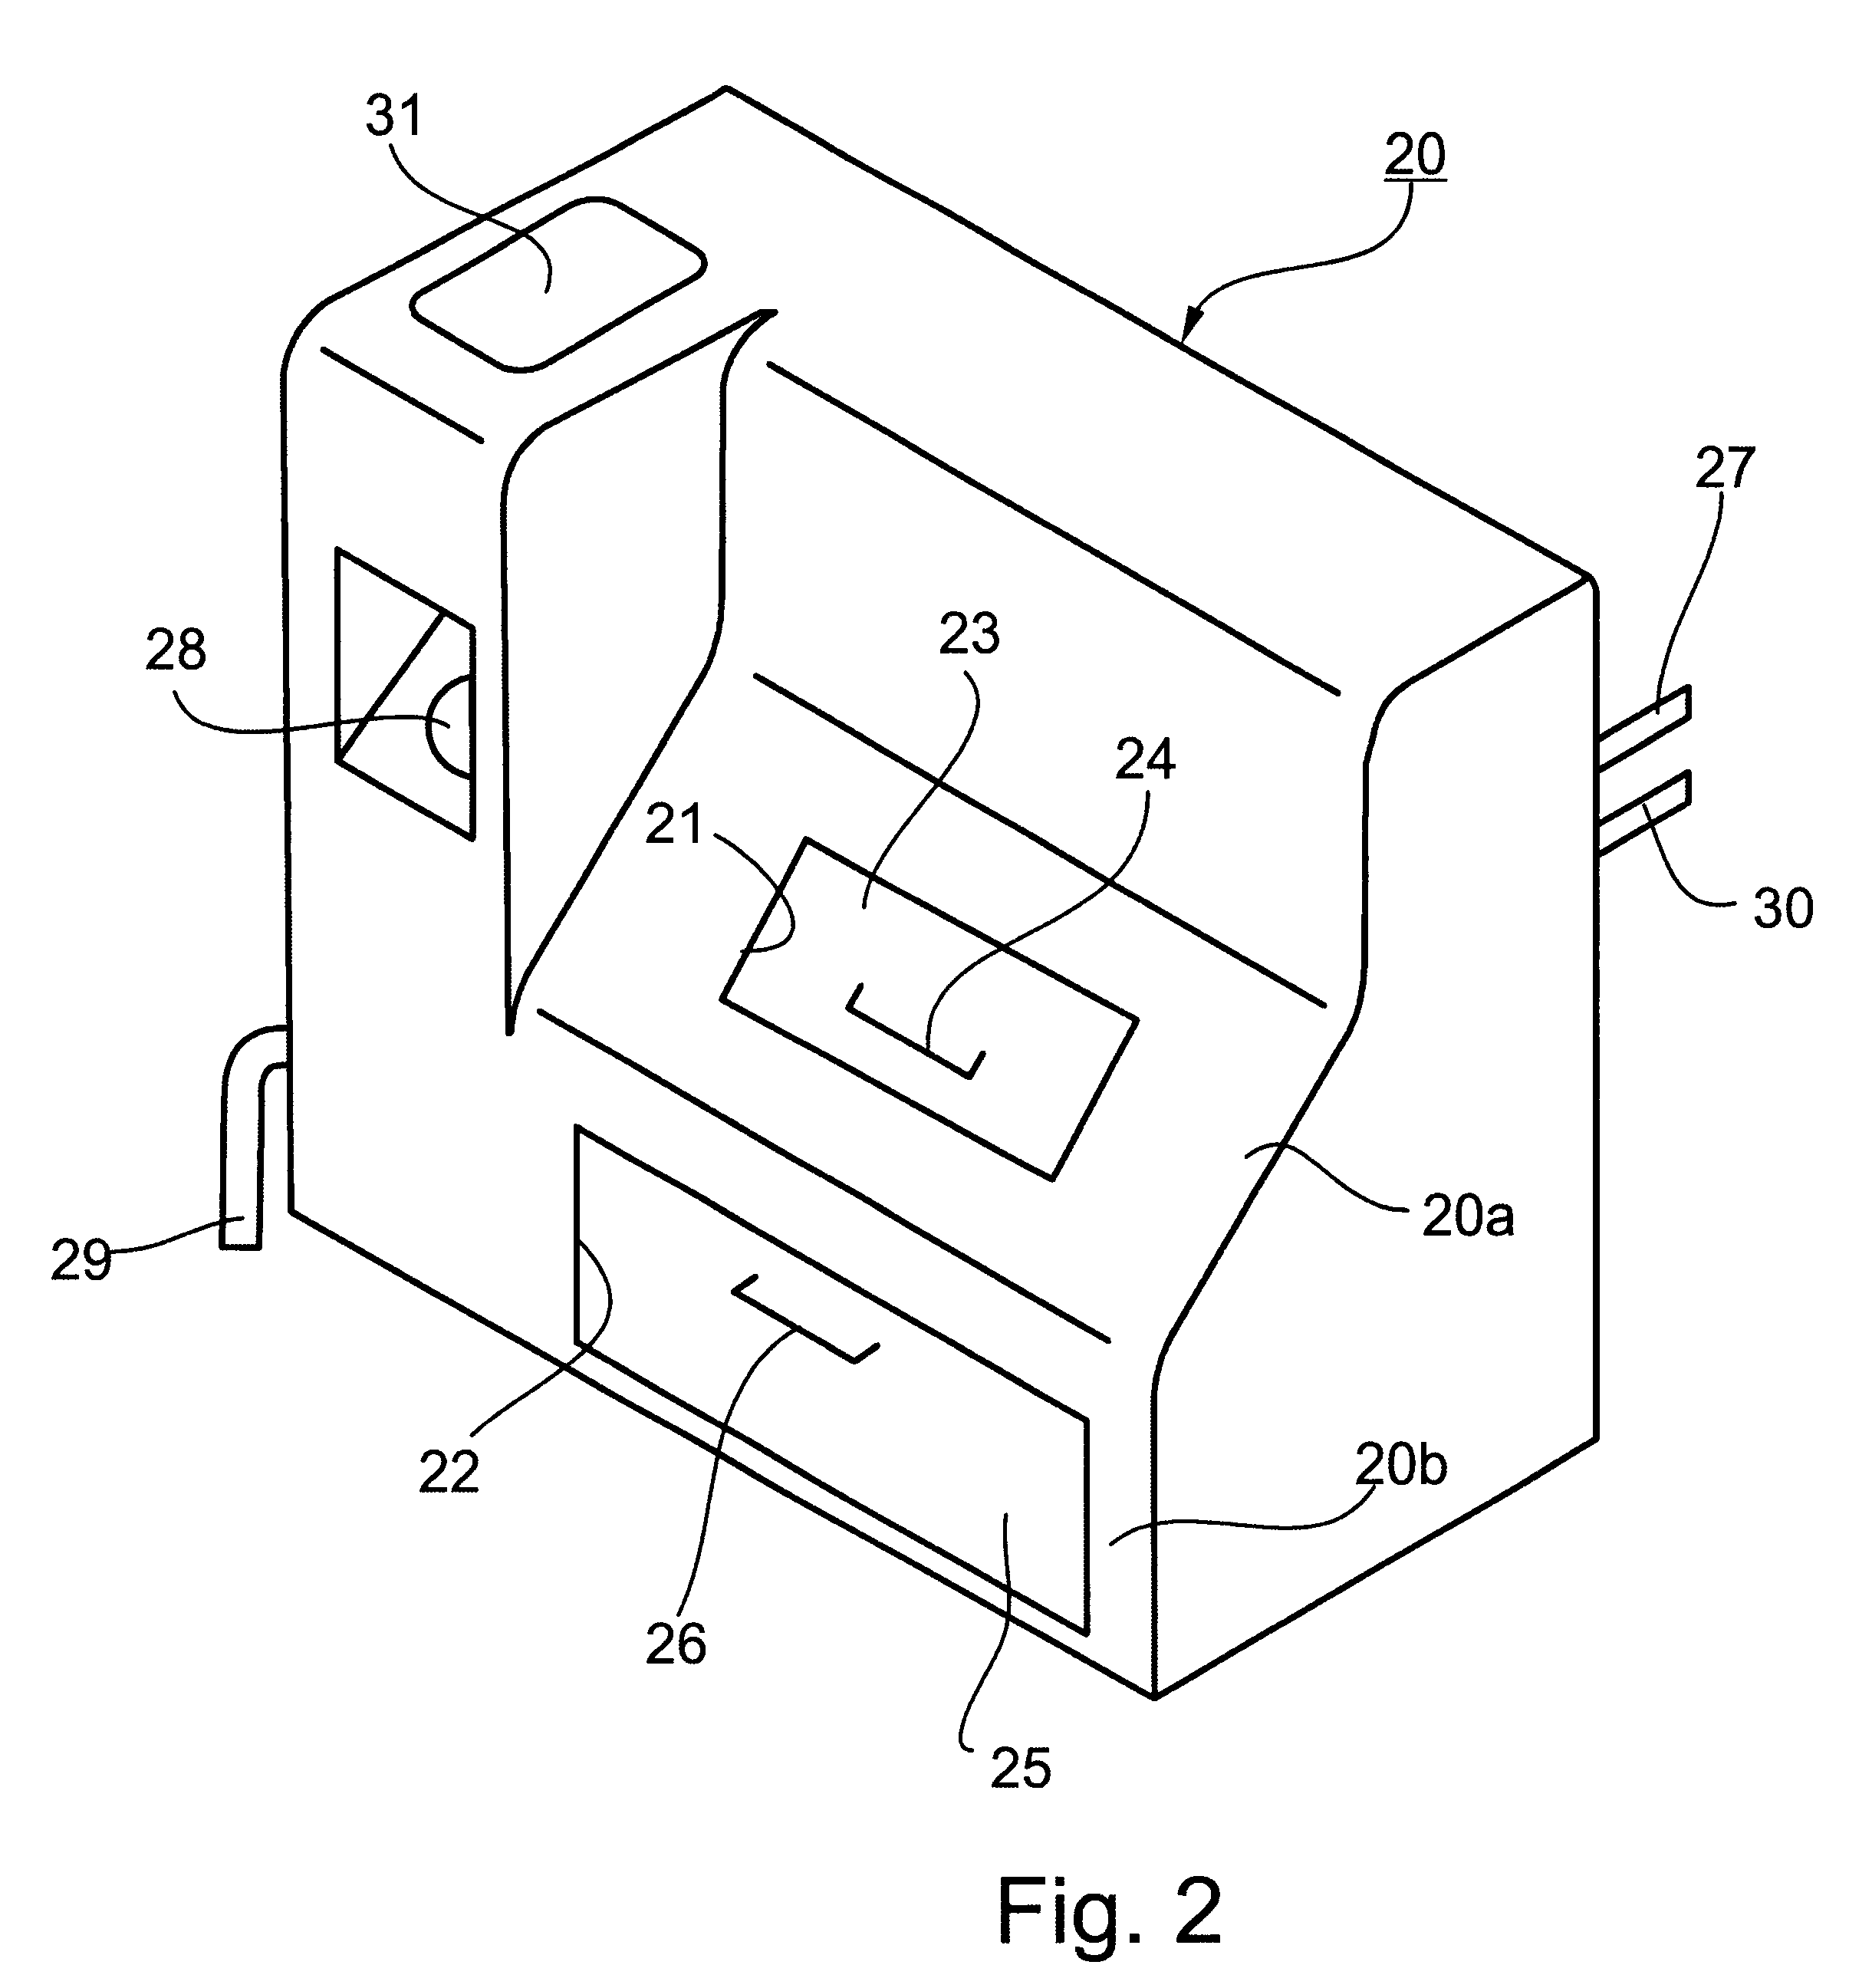 Apparatus for treating waste, particularly medical waste, to facilitate its disposition